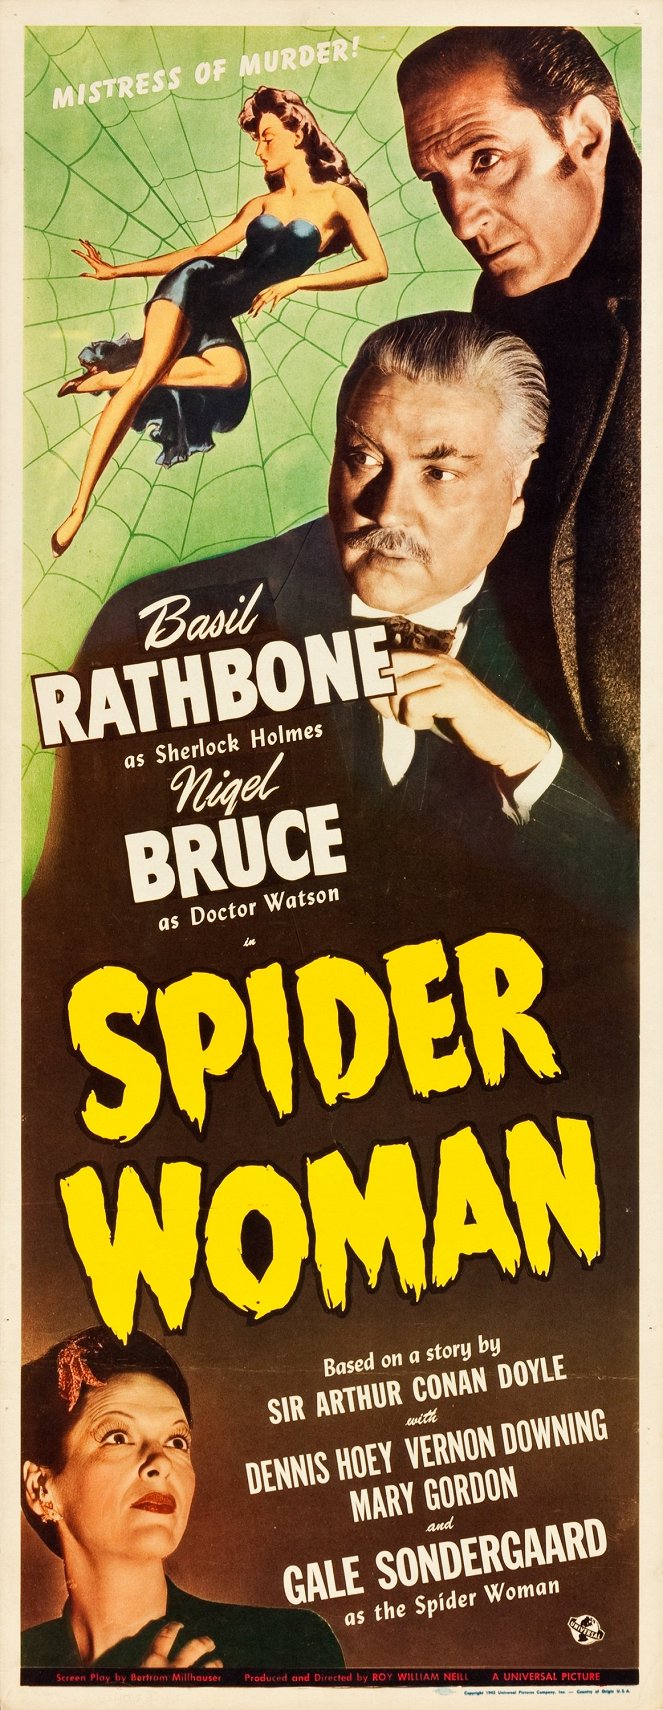 Sherlock Holmes and the Spider Woman - Posters